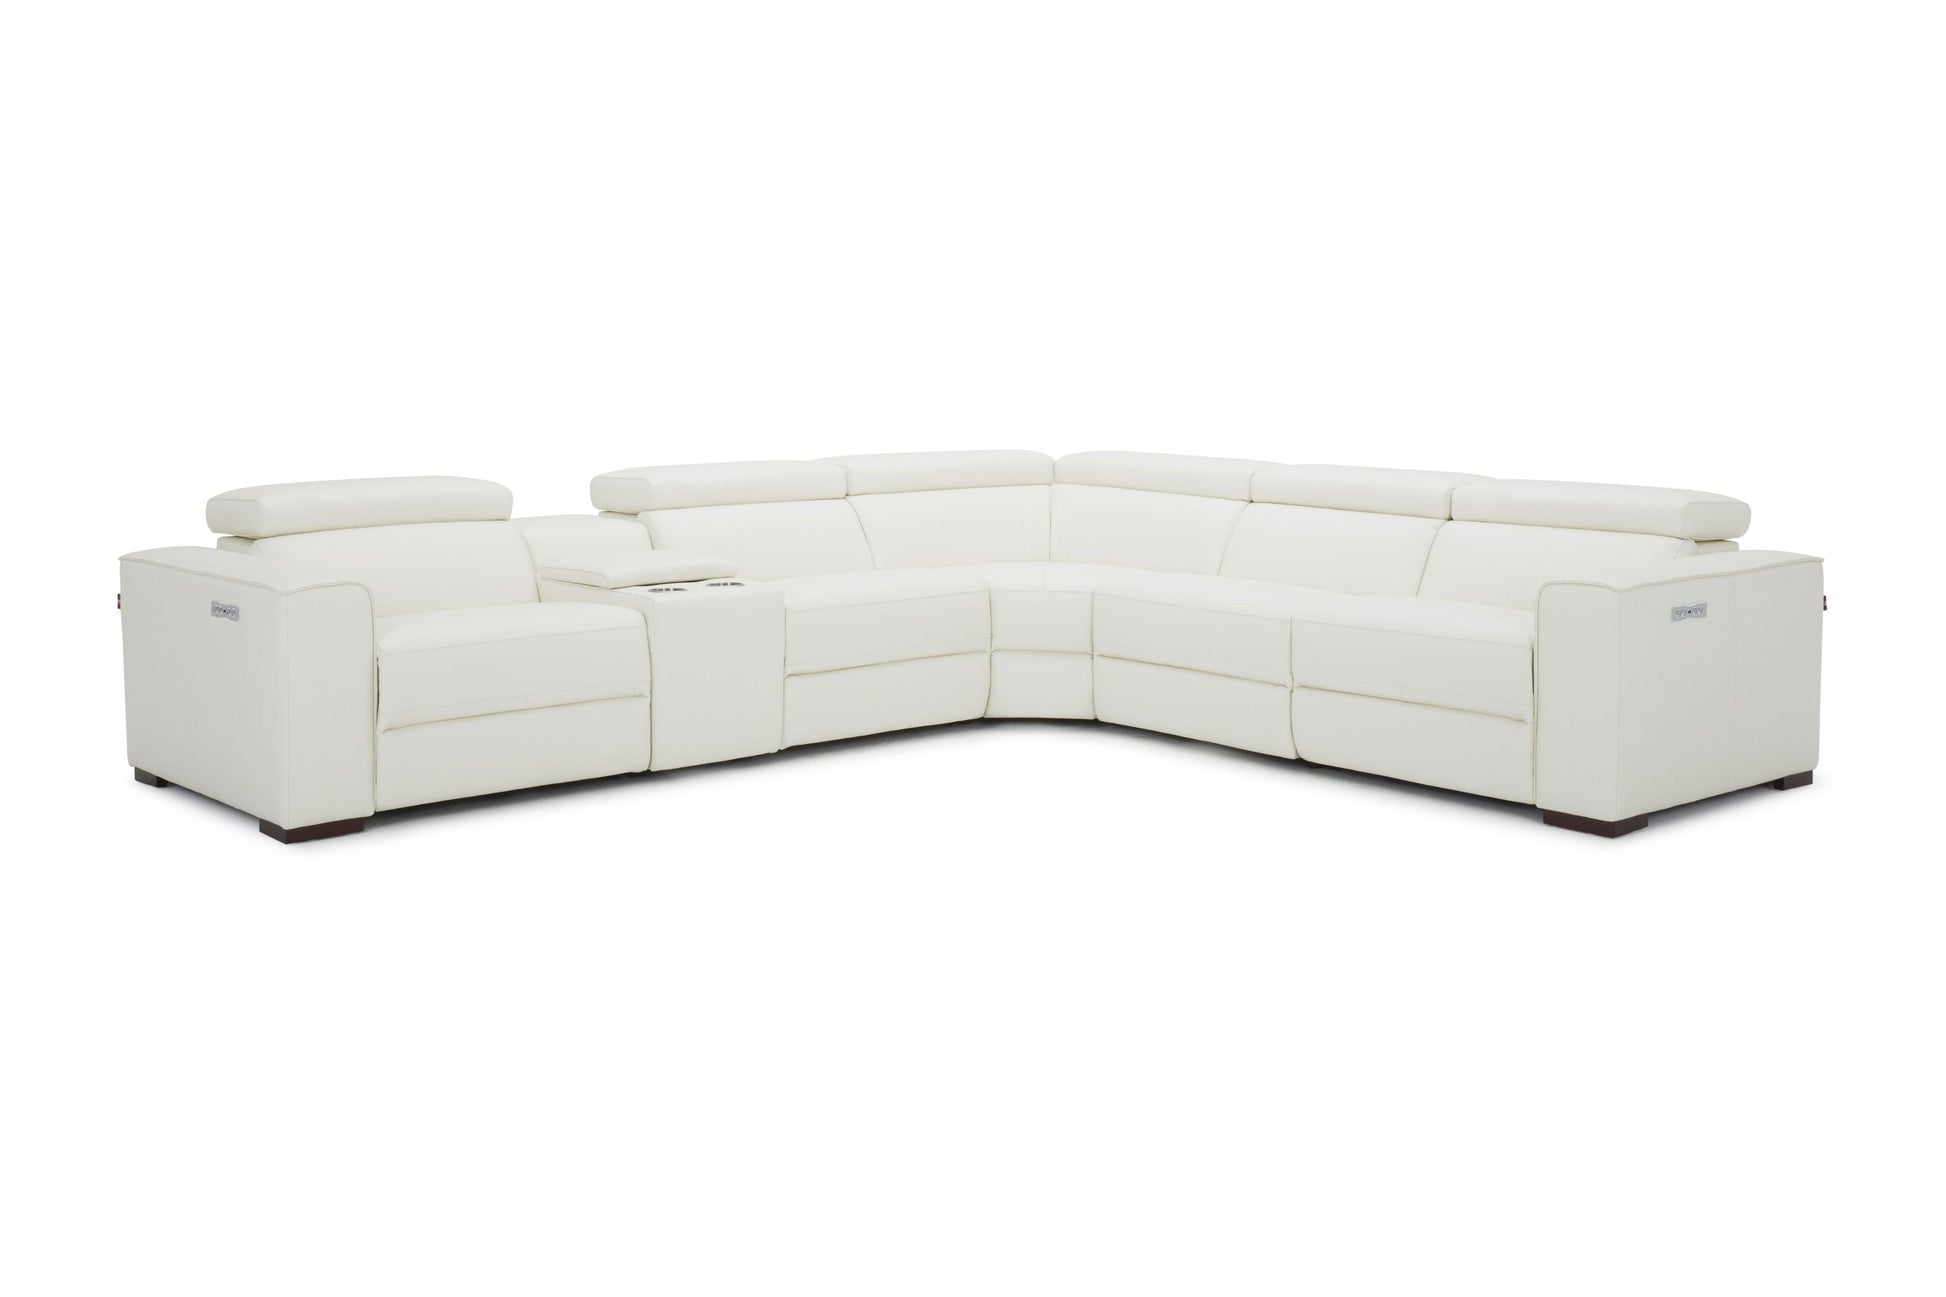 Picasso 6Pc Motion Sectional In Silver Grey - Venini Furniture 